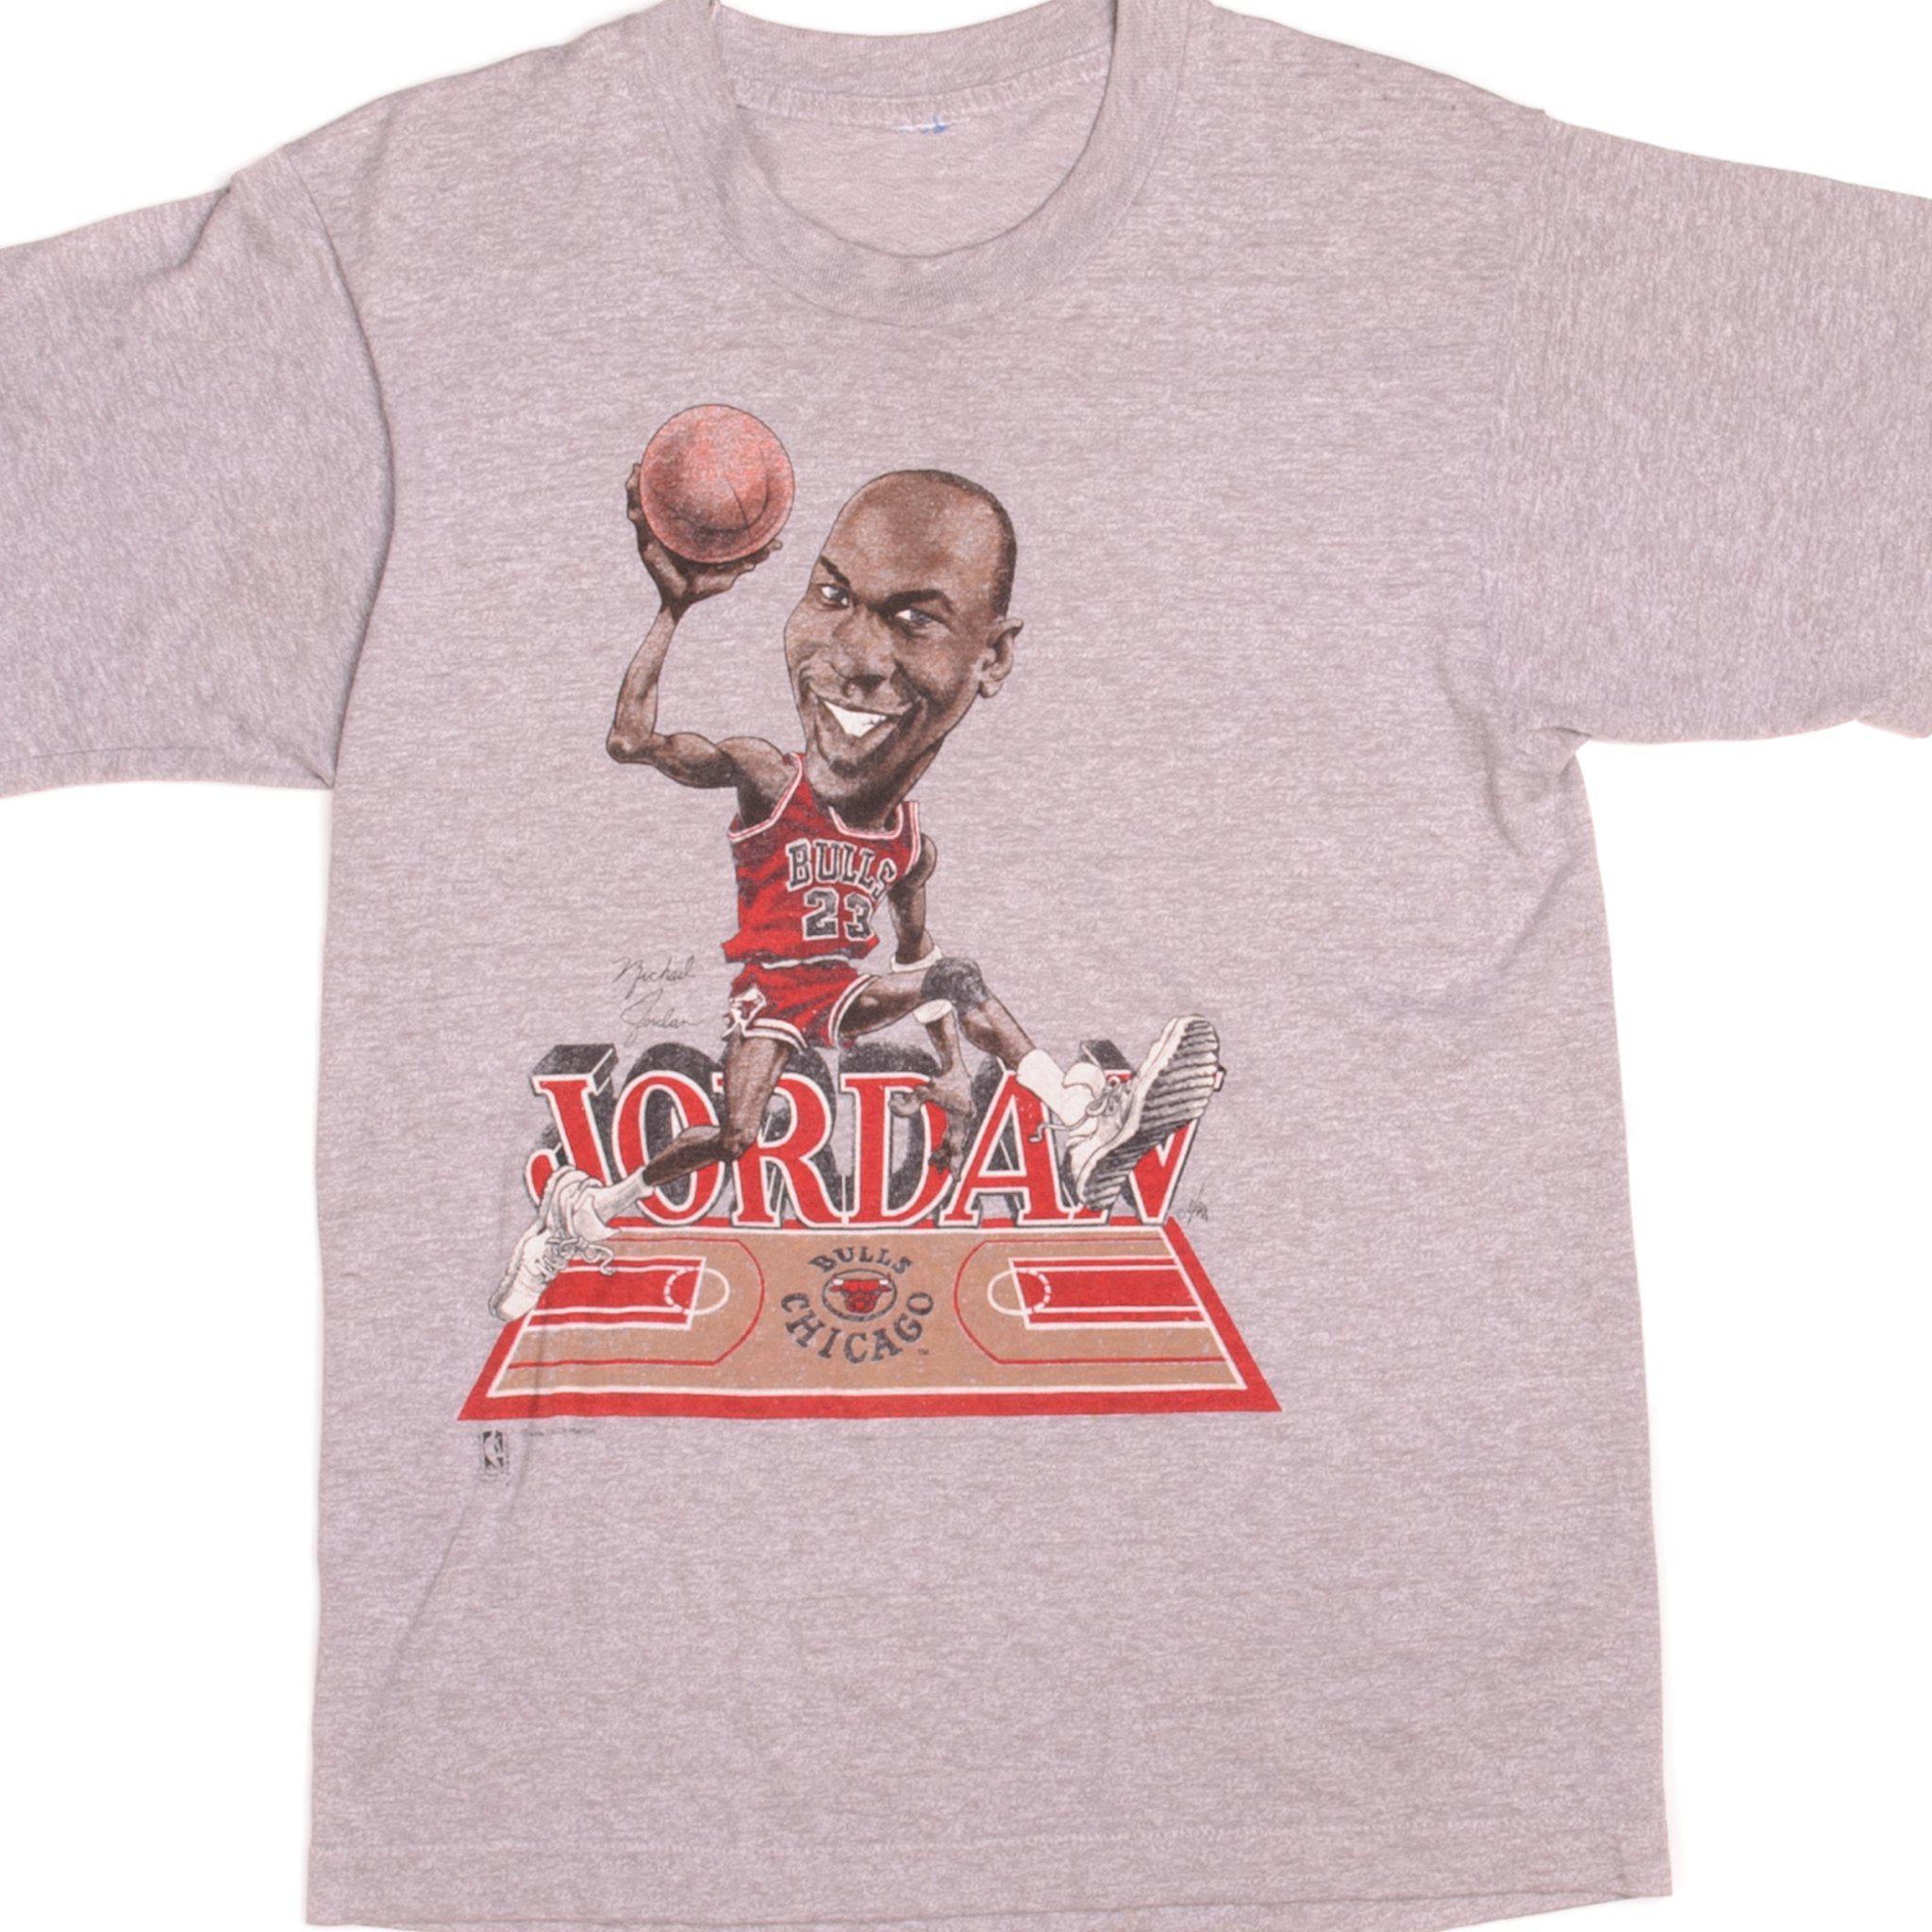 Sports / College Vintage NBA Chicago Bulls Michael Jordan Tee Shirt 1990s Size Small Made in USA